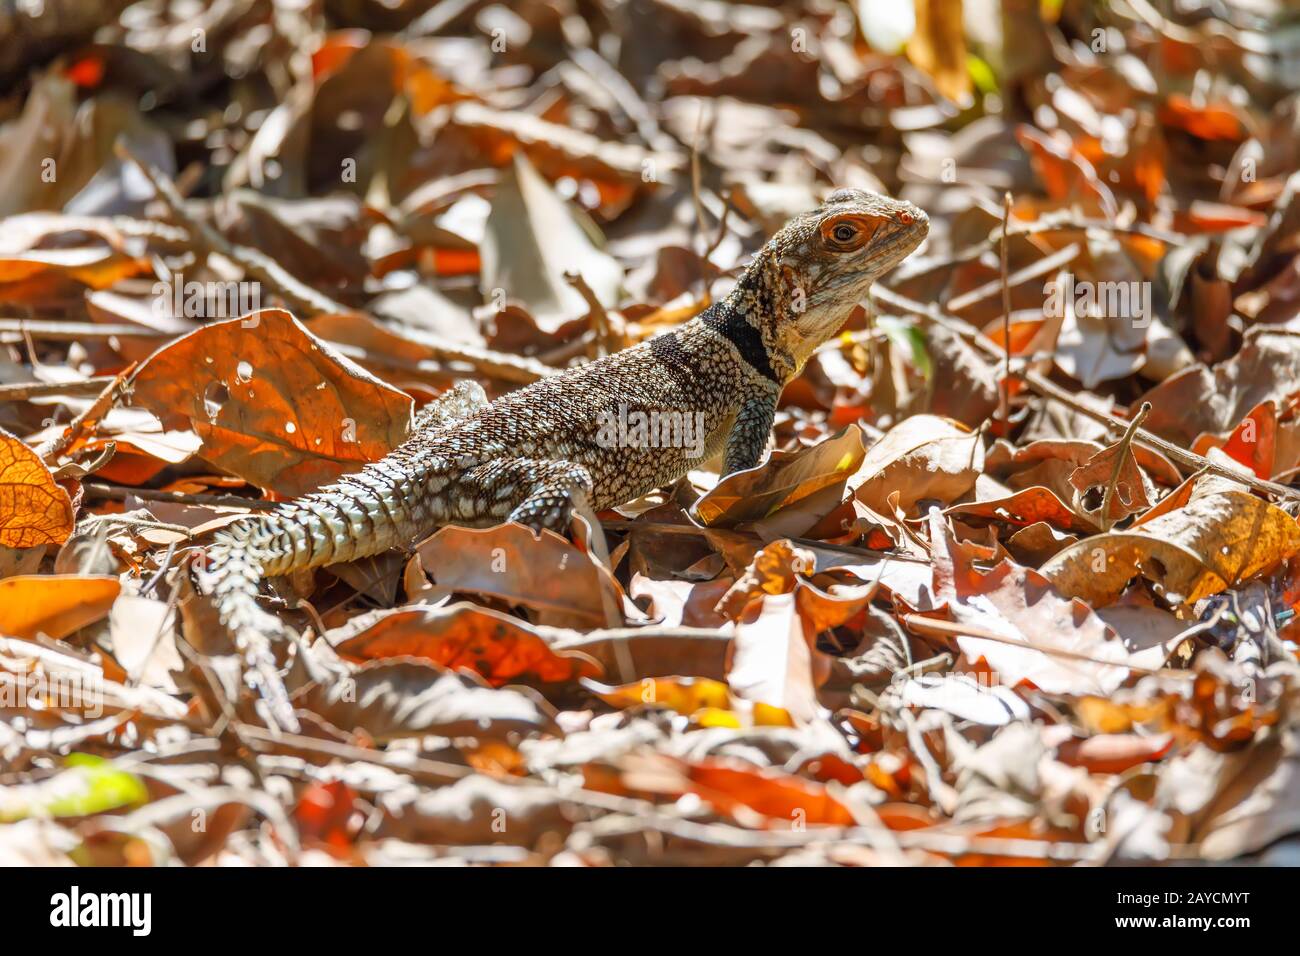 Halsbandleguan High Resolution Stock Photography and Images - Alamy